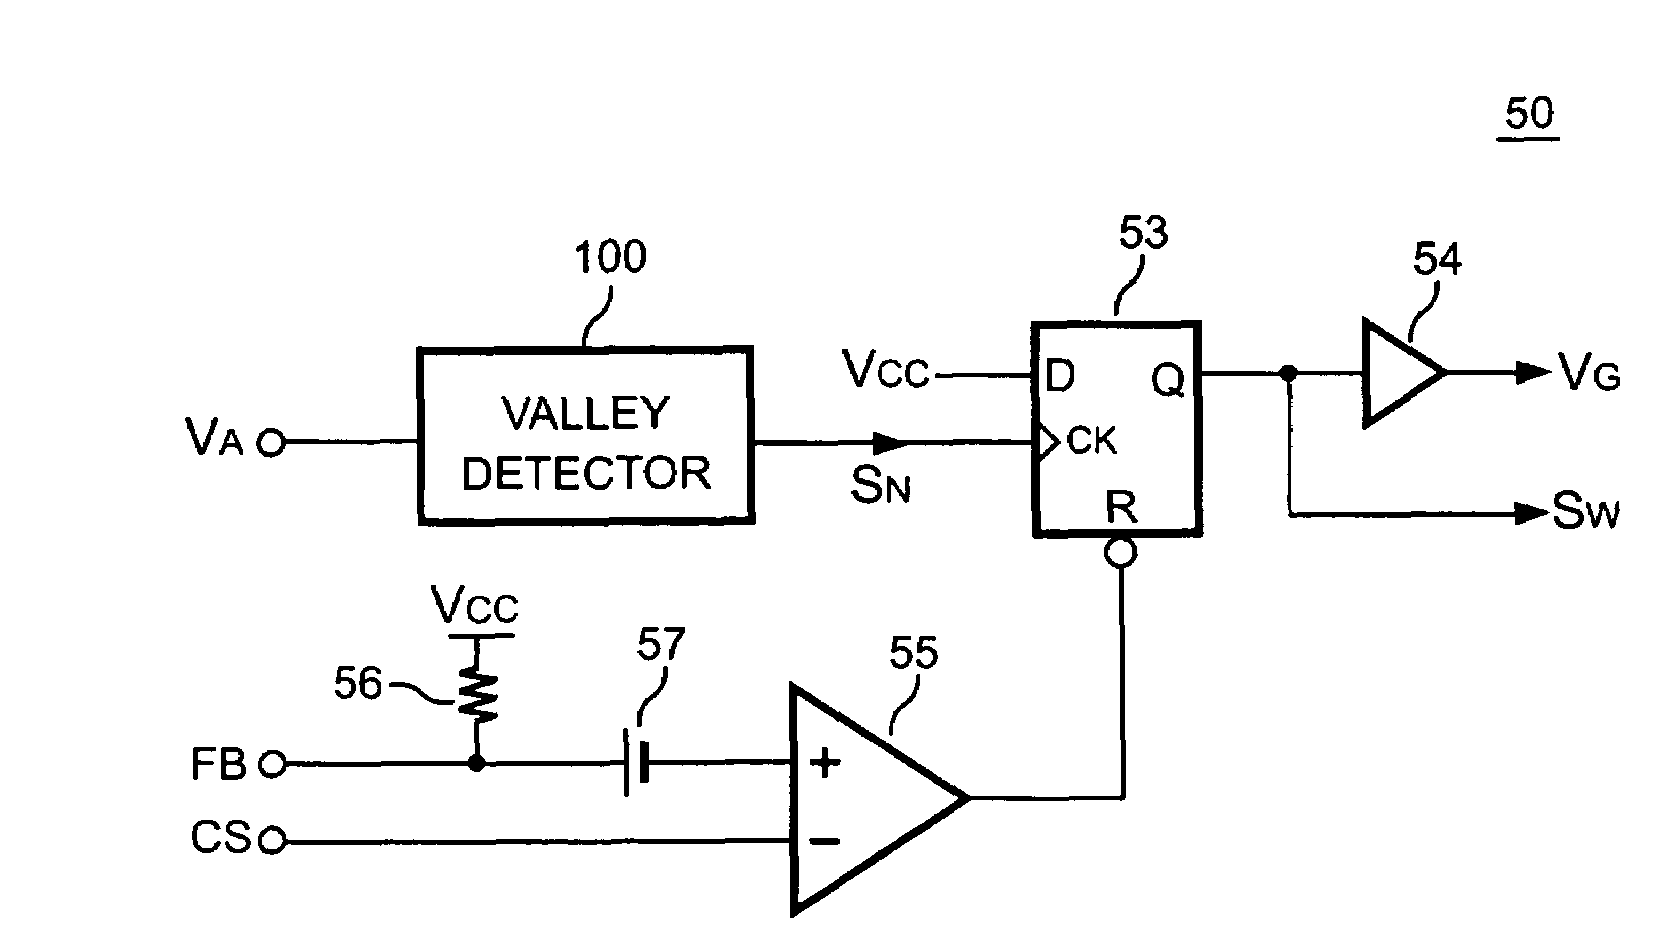 Switching control circuit having a valley voltage detector to achieve soft switching for a resonant power converter